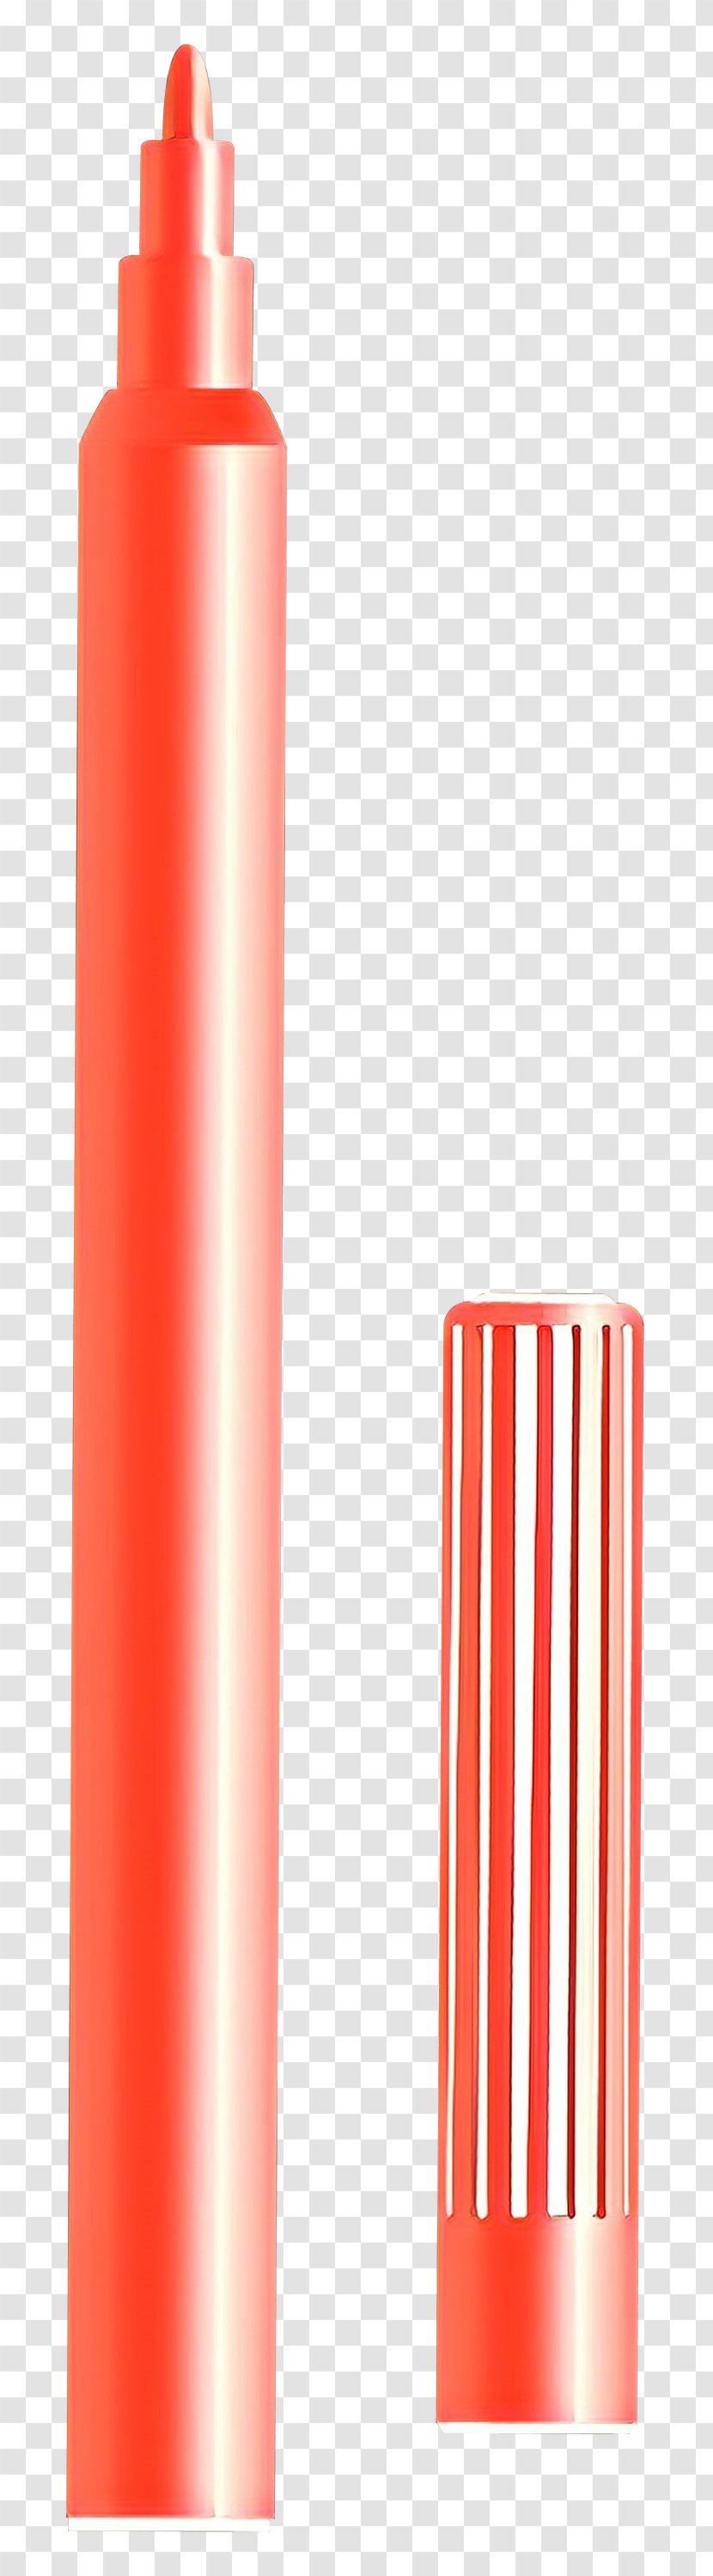 Red Cylinder Material Property - Cartoon Transparent PNG